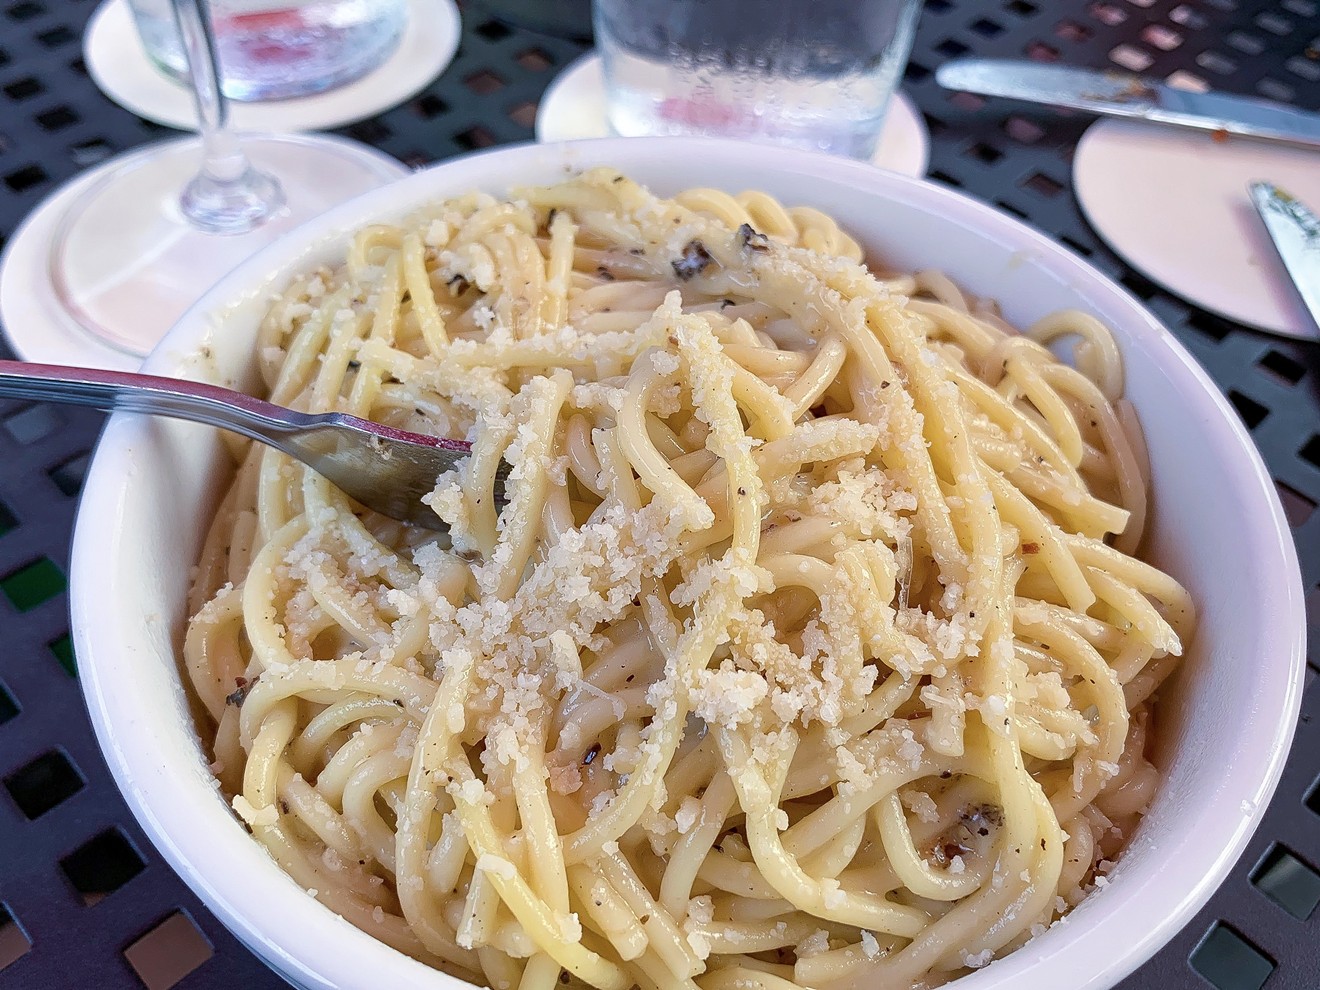 This cacio e pepe is now at Night Heron full-time.